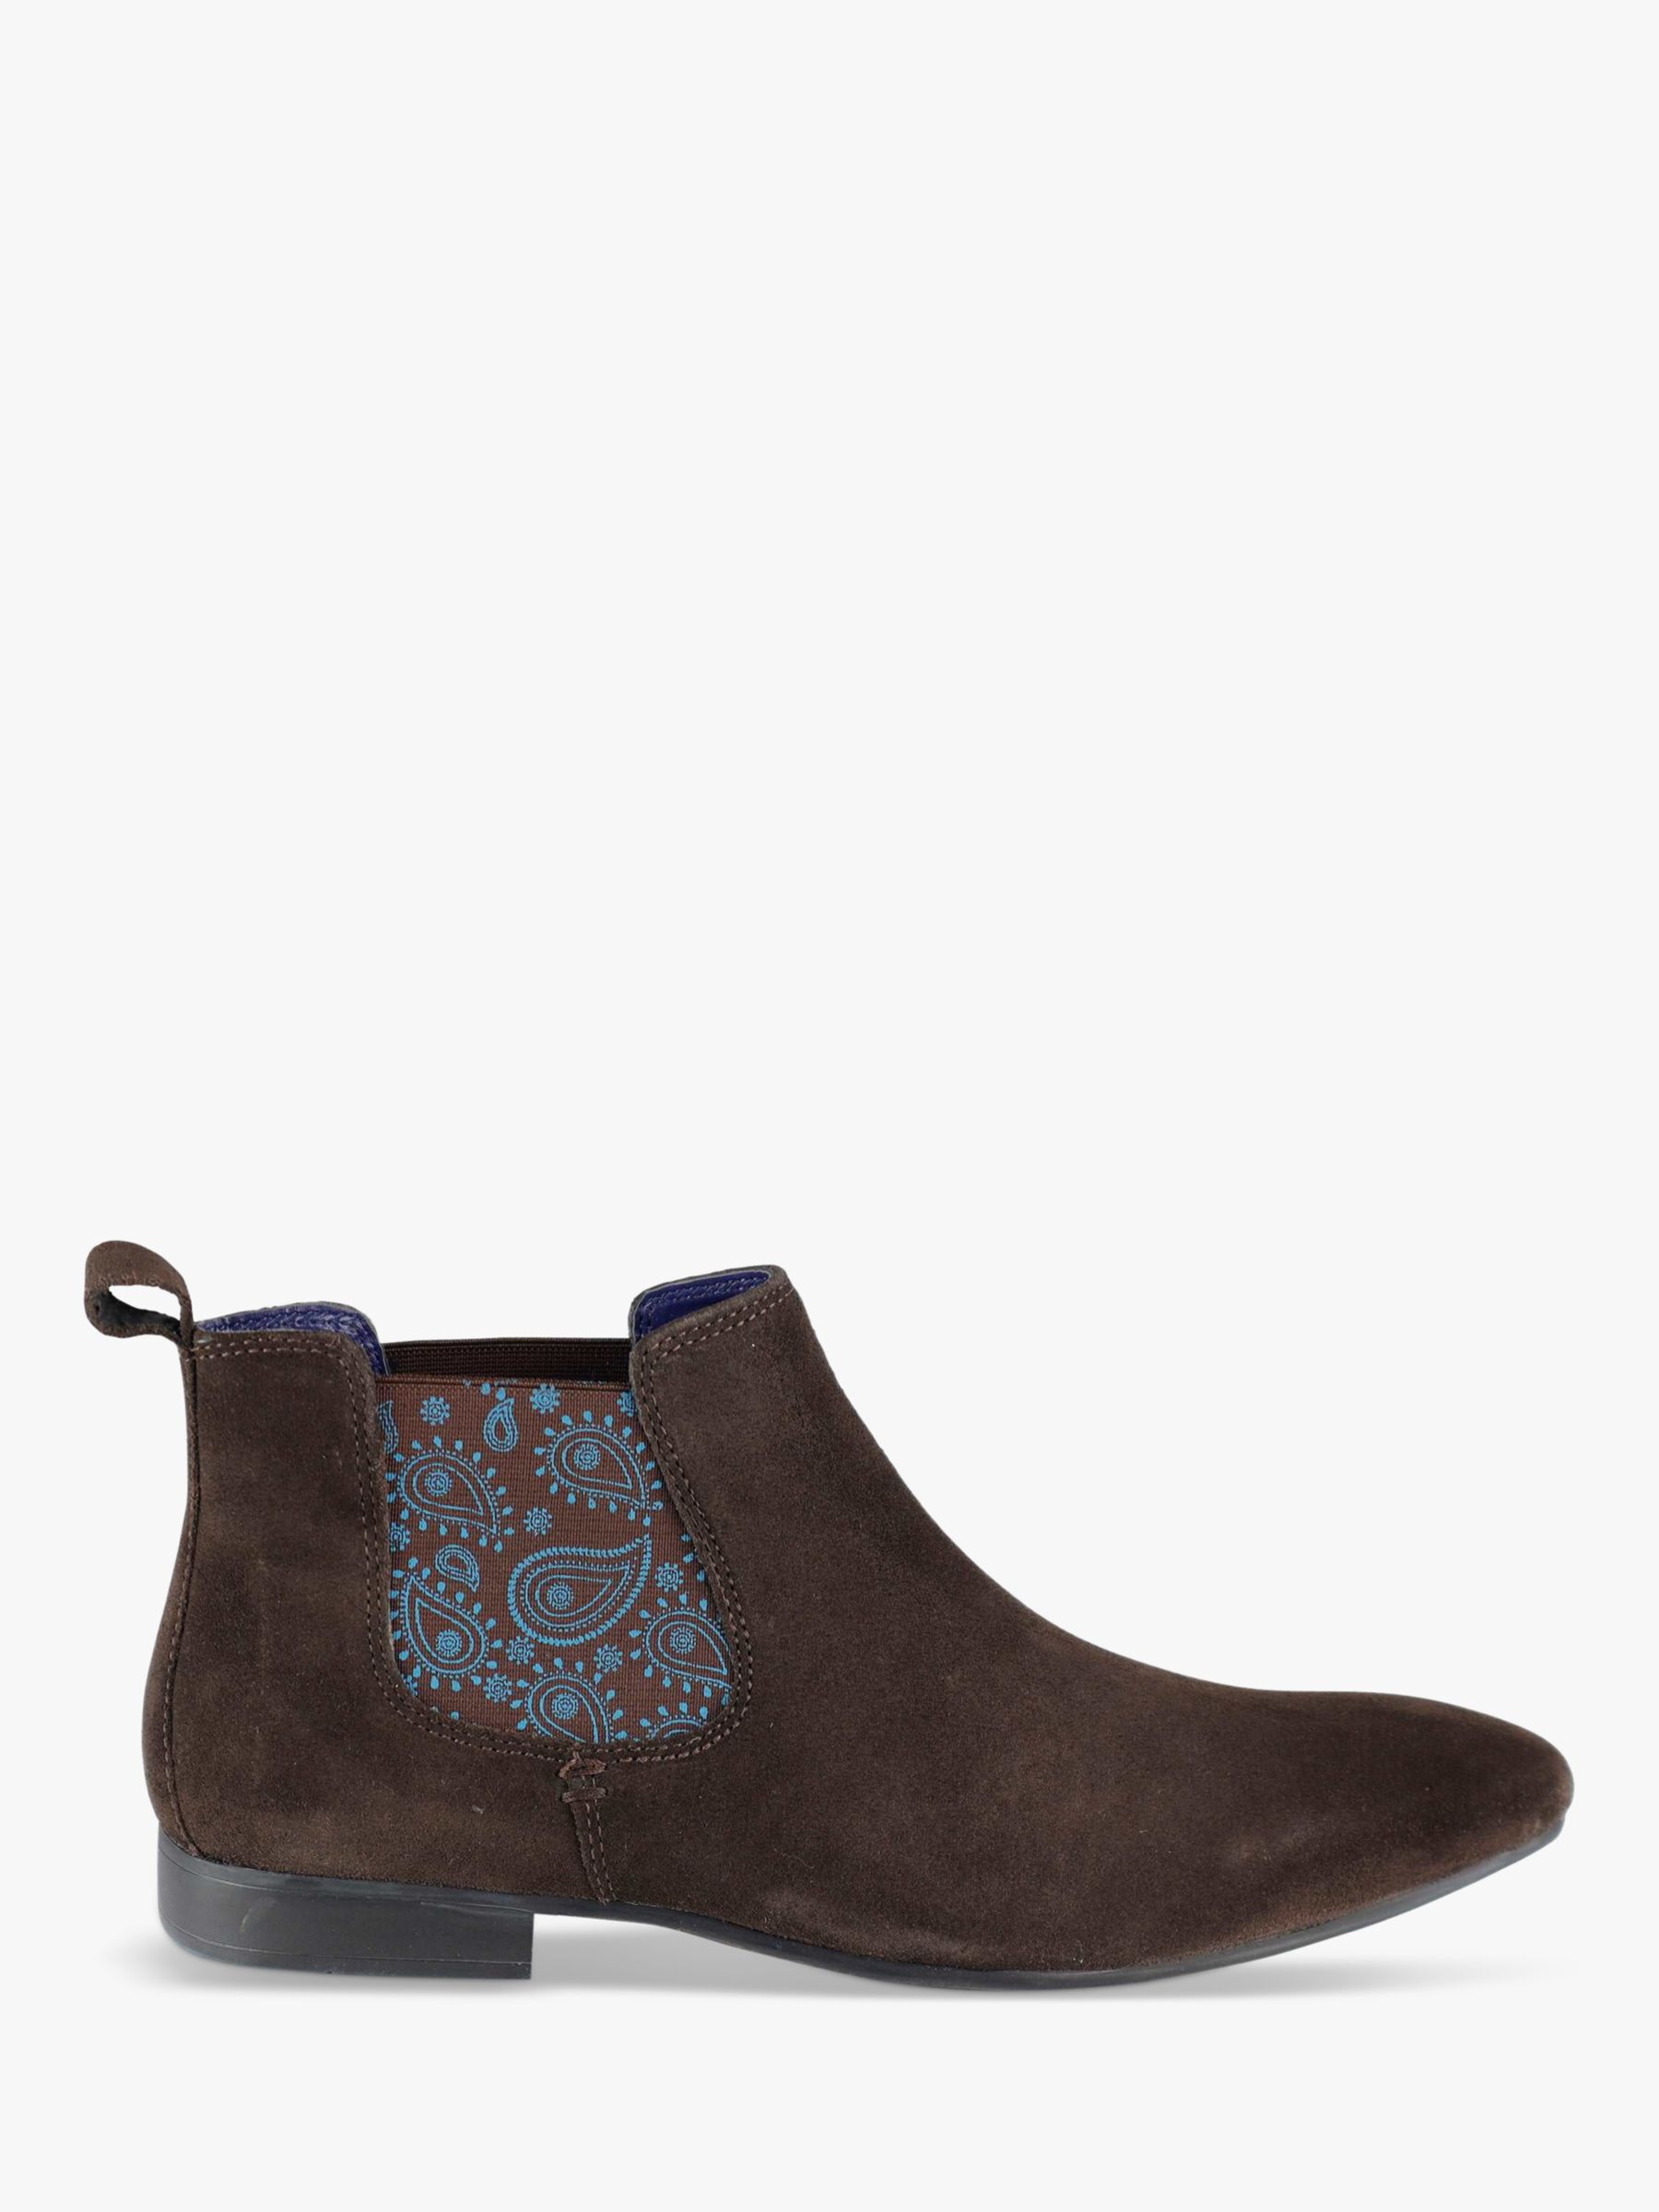 Silver Street London Carnaby Suede Chelsea Boots, Brown, 8